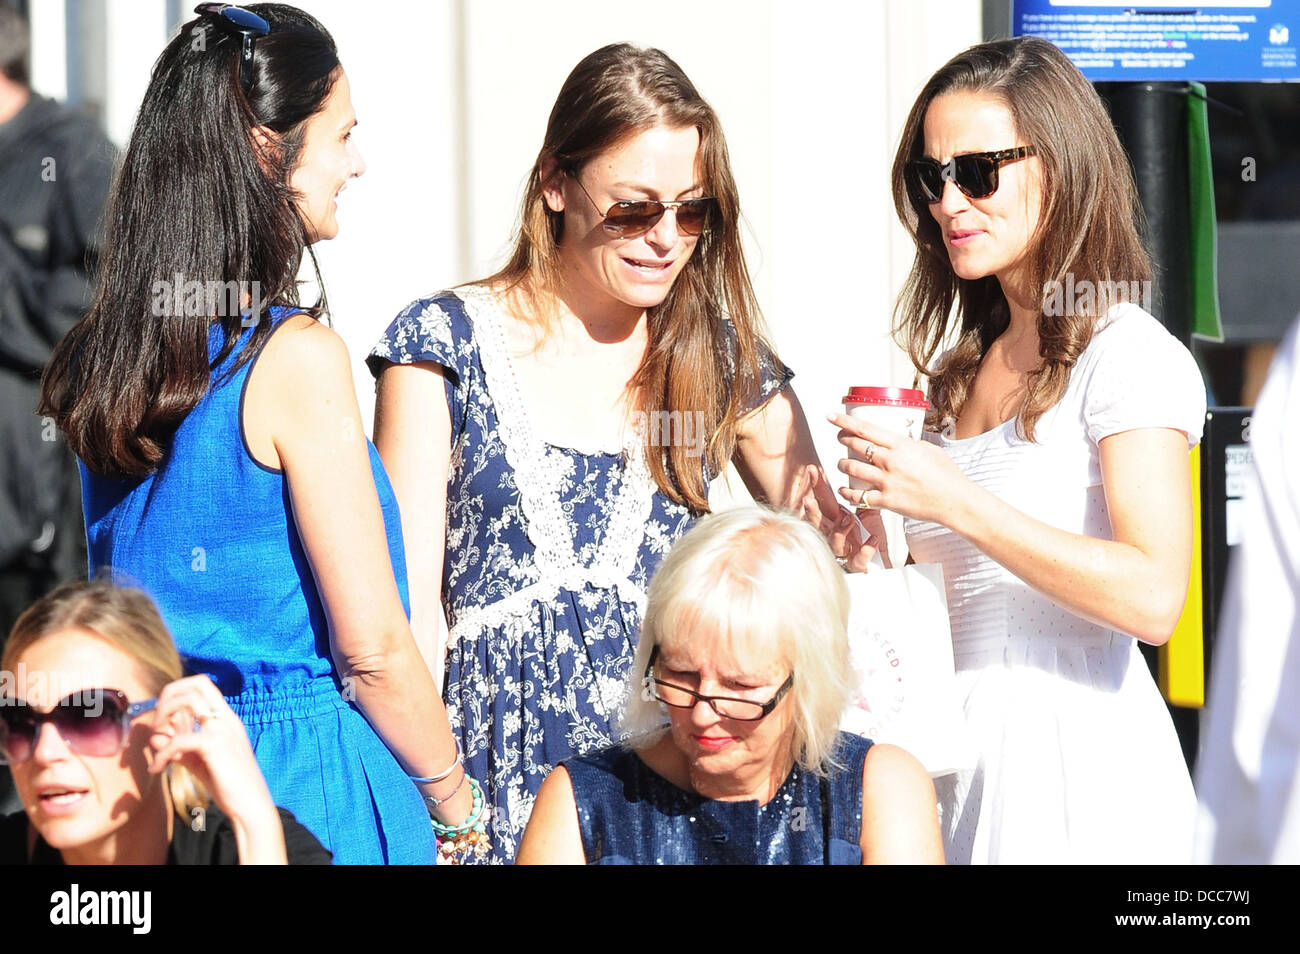 Pippa Middleton meets some friends at a coffee shop on her way to work  London, England - 29.09.11 Credit Mandatory: WENN.com Stock Photo - Alamy